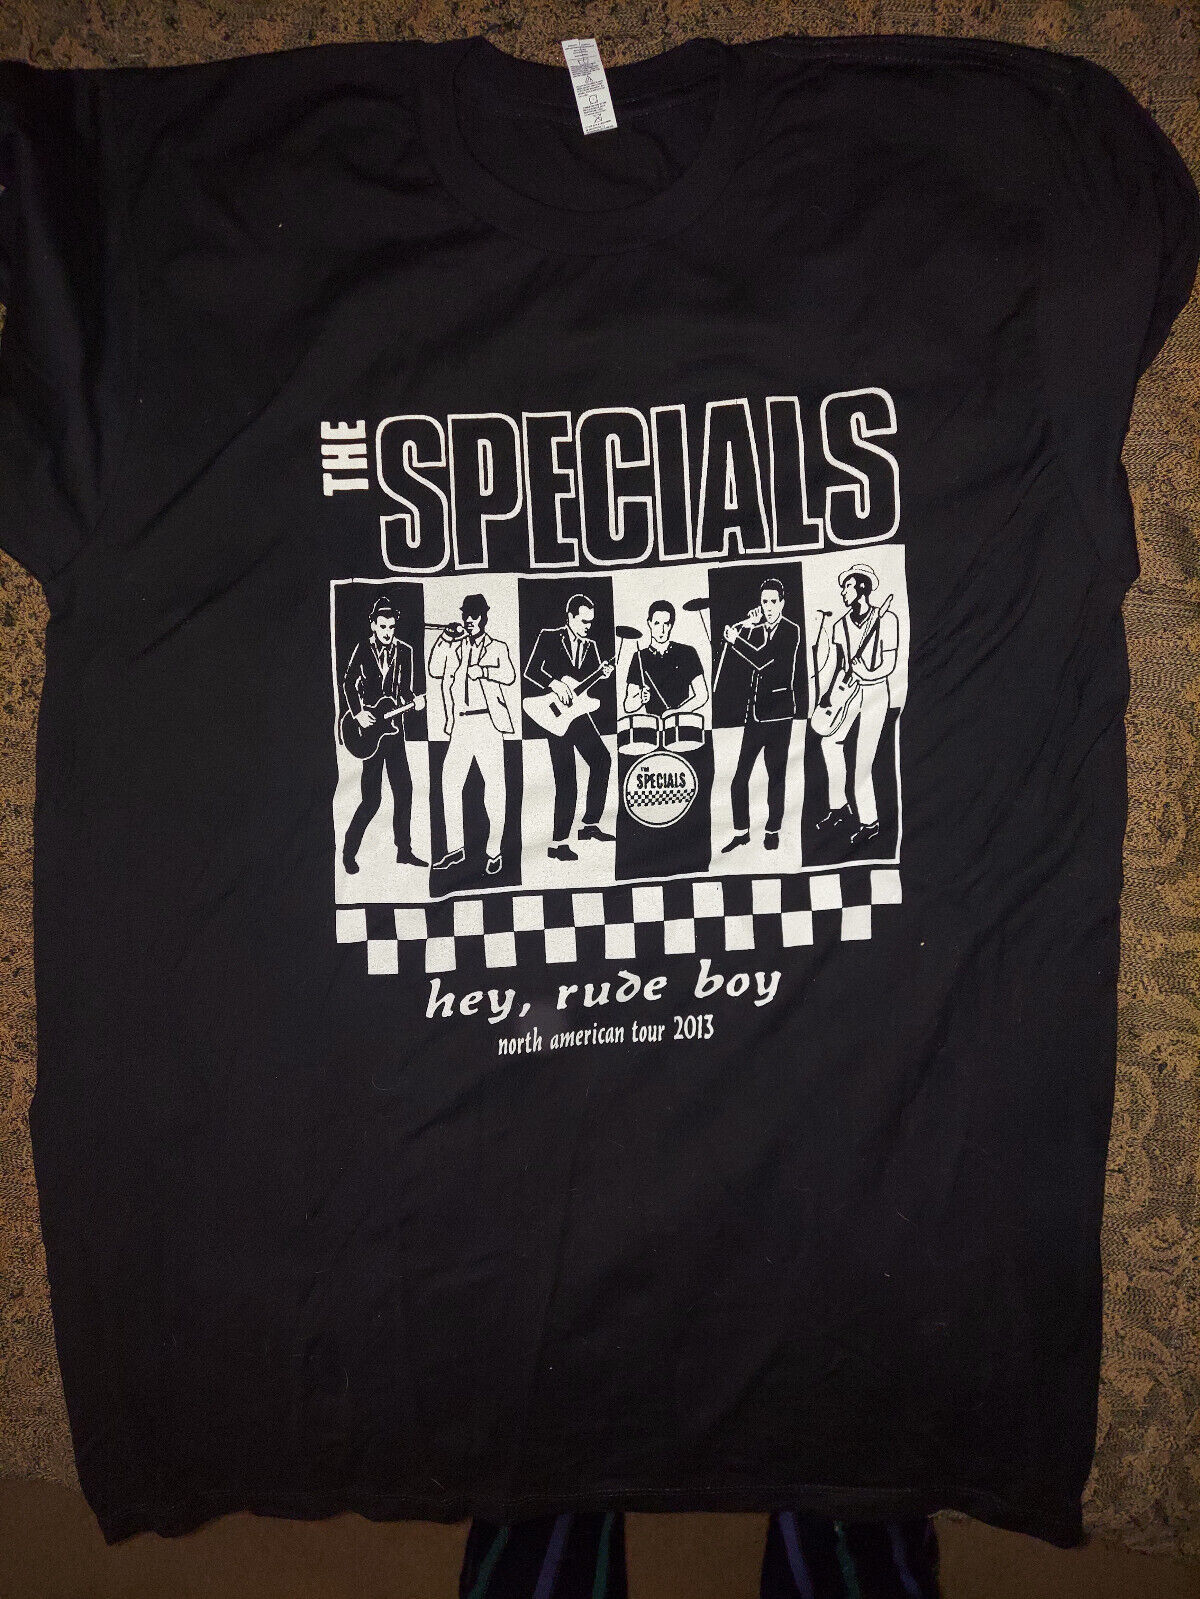 Primary image for The Specials Shirt Terry Hall 2013 Sz L Slade Skinhead Punk Oi! Ska Rudeboy